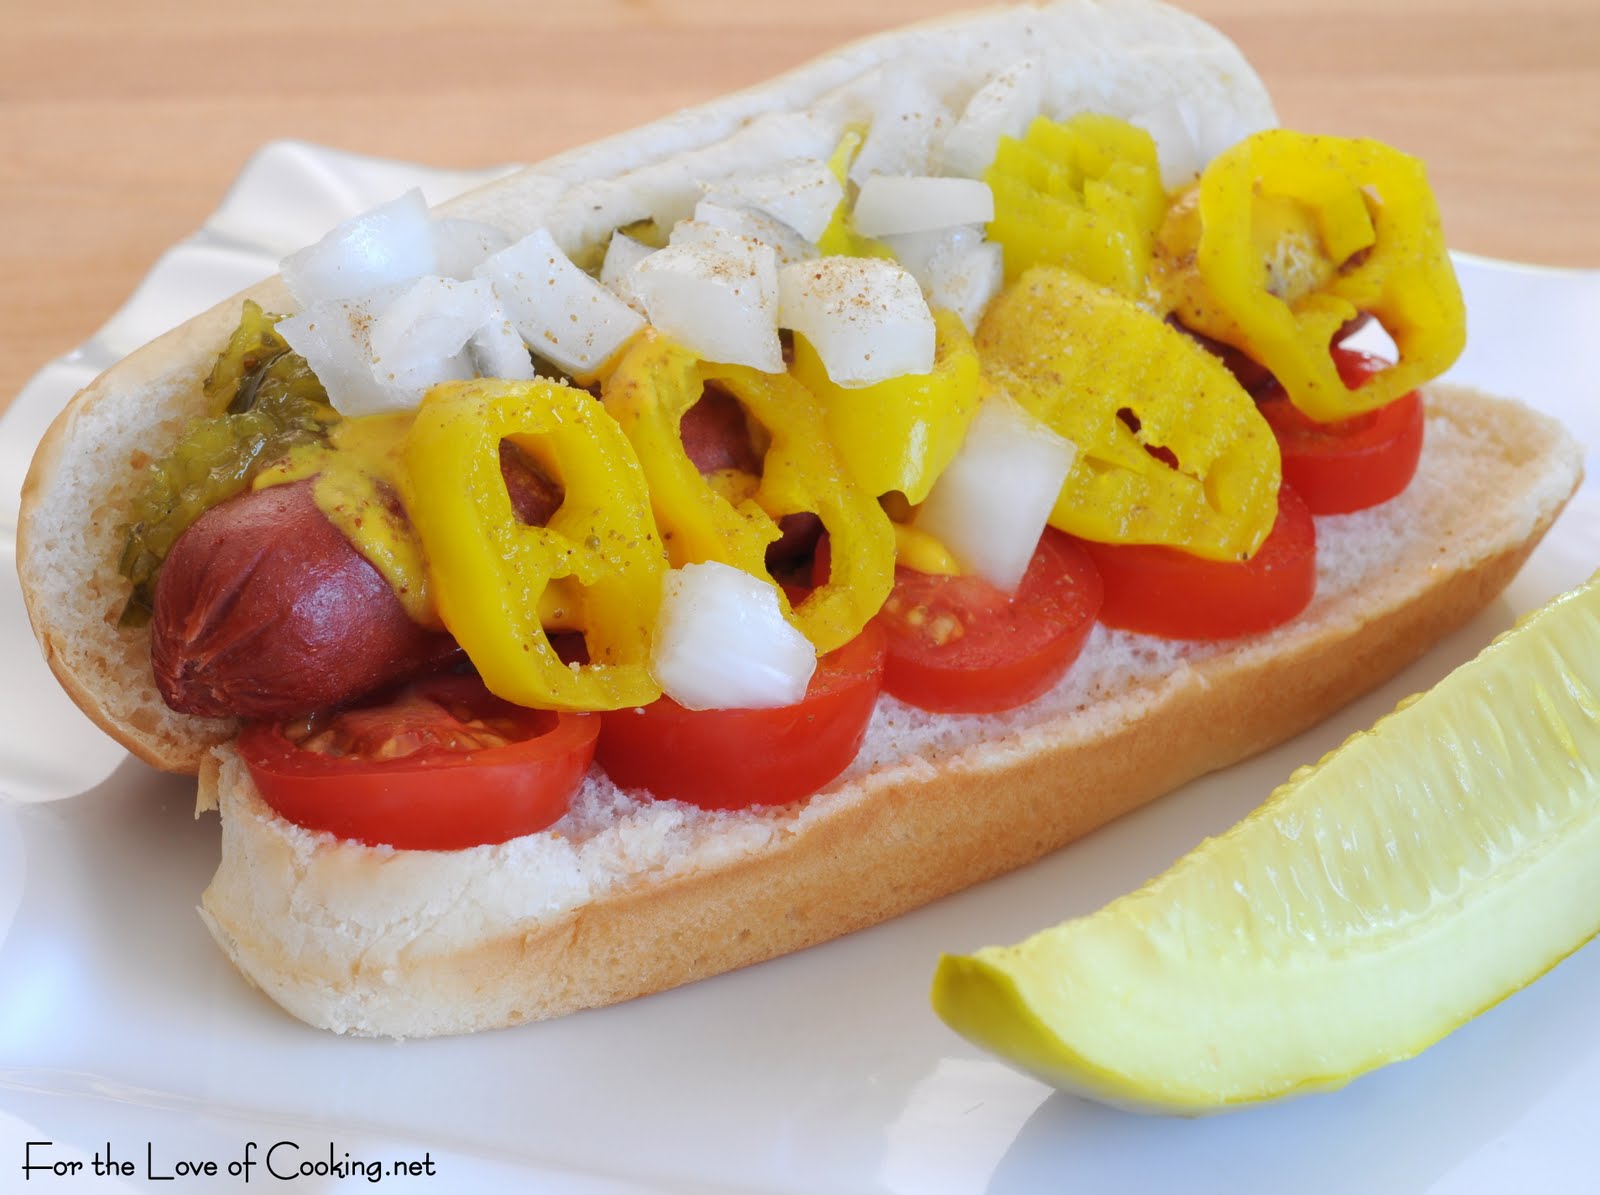 Chicago Style Hot Dog | For the Love of Cooking